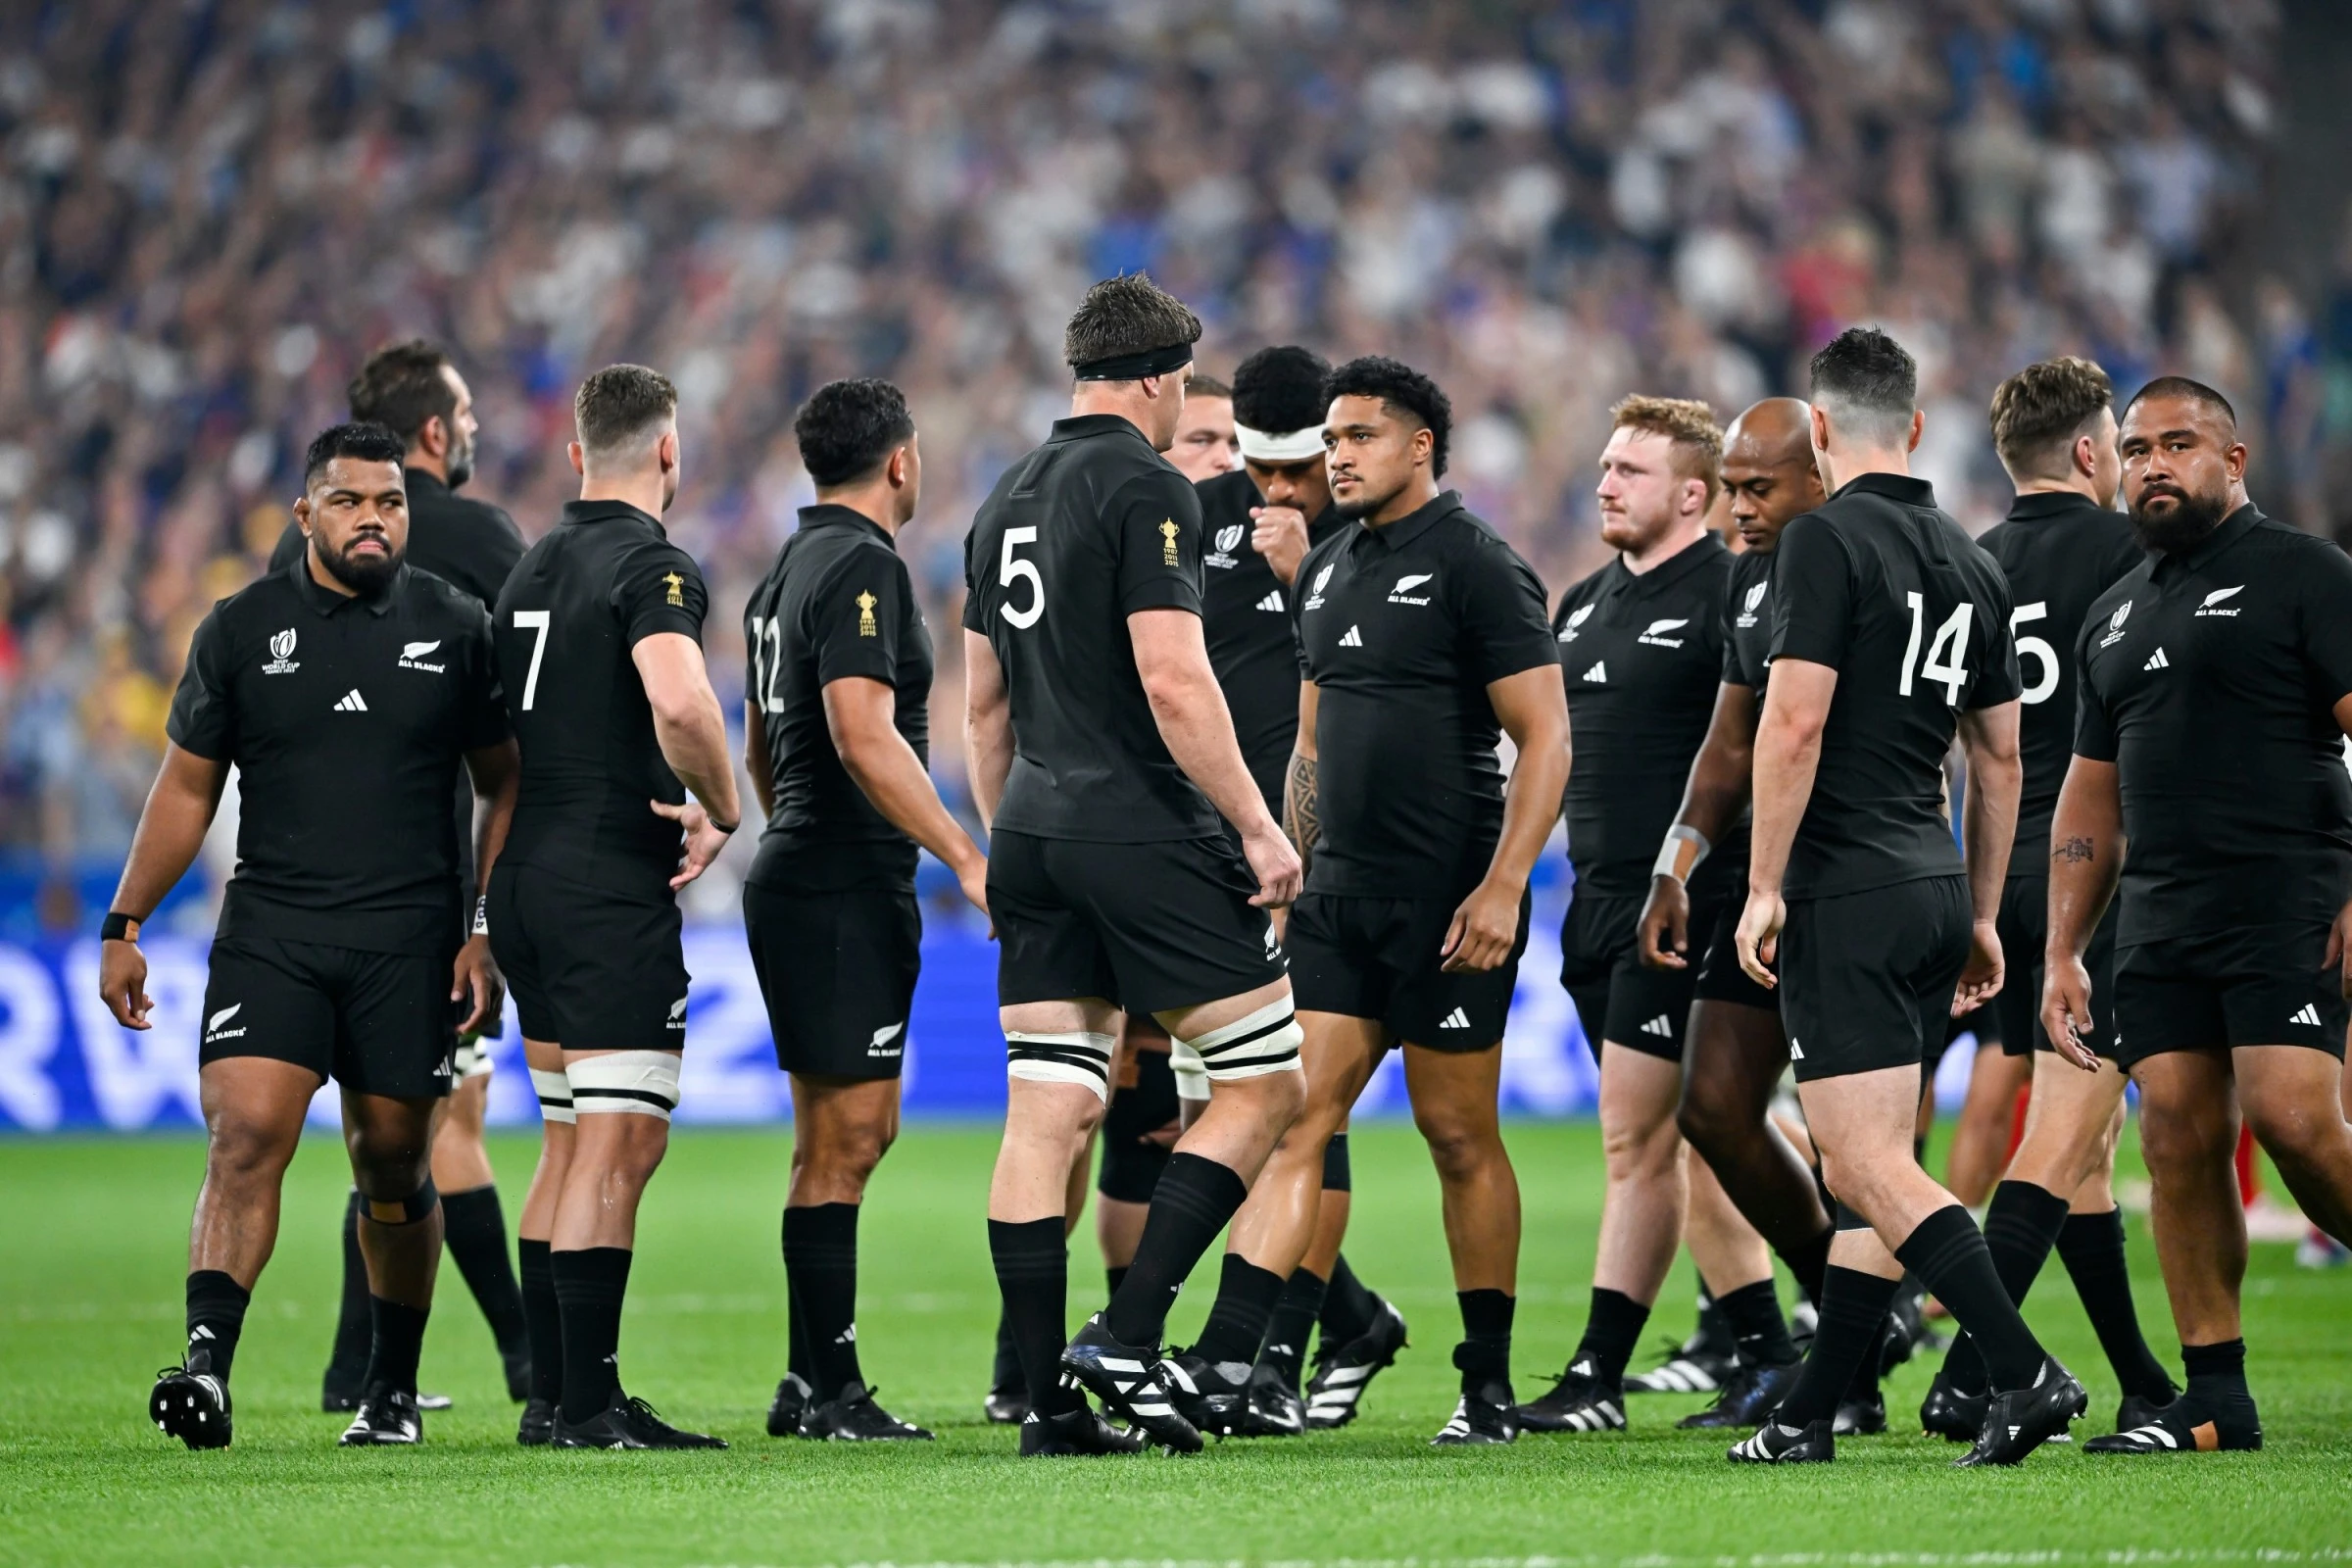 New Zealand's Rugby Obsession: From the All Blacks to Grassroots Clubs